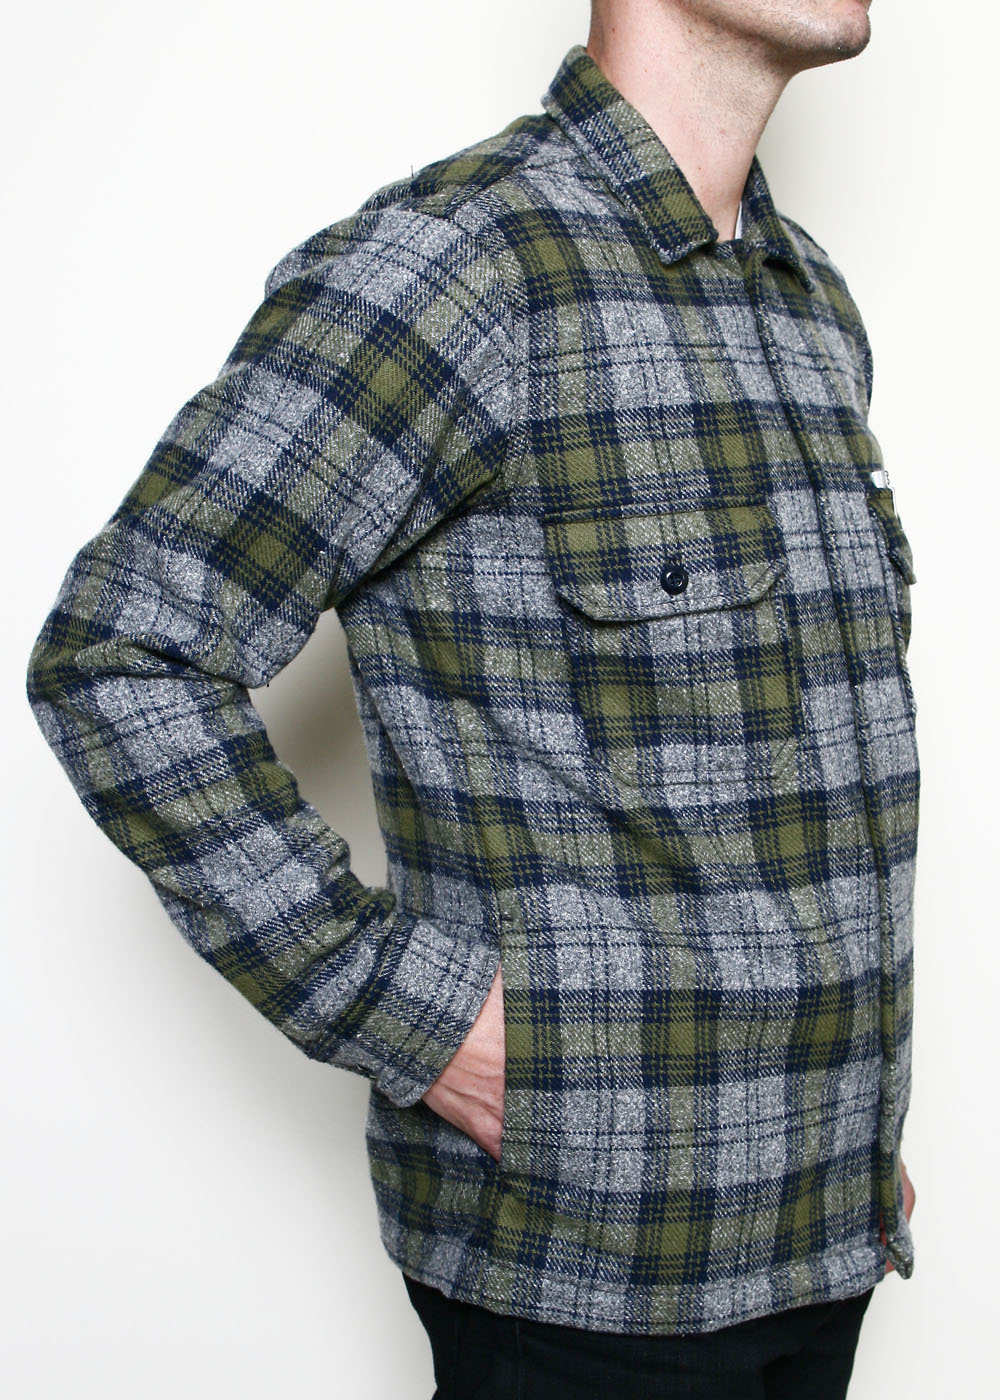 Rogue Territory Infantry Shirt in Olive/Gray Brushed Plaid - Earl's  Authentics